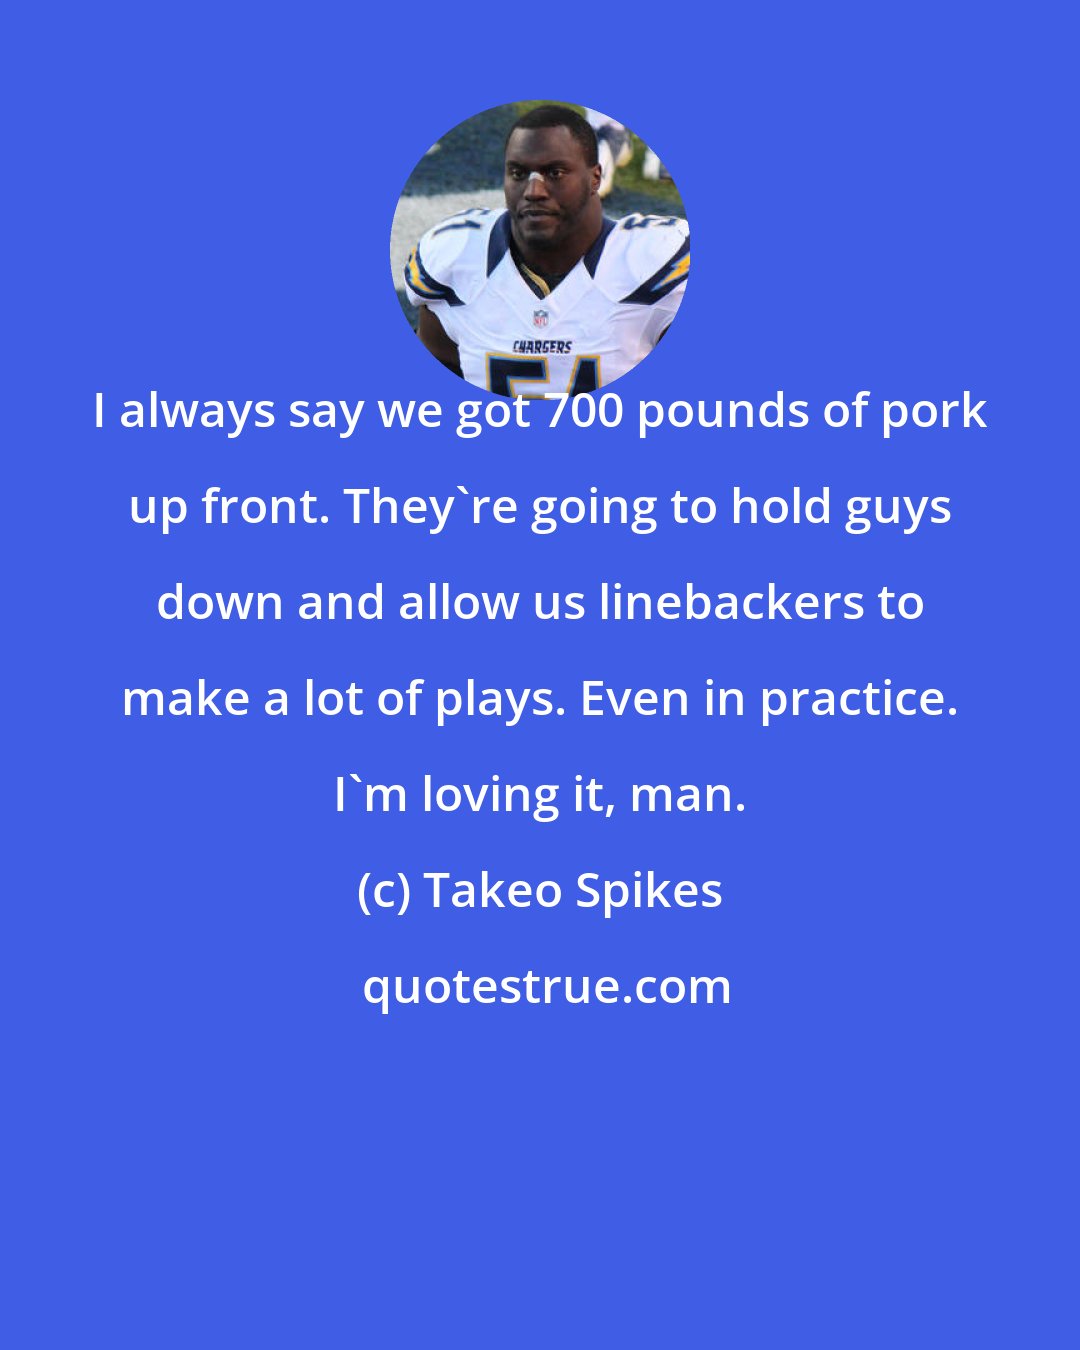 Takeo Spikes: I always say we got 700 pounds of pork up front. They're going to hold guys down and allow us linebackers to make a lot of plays. Even in practice. I'm loving it, man.